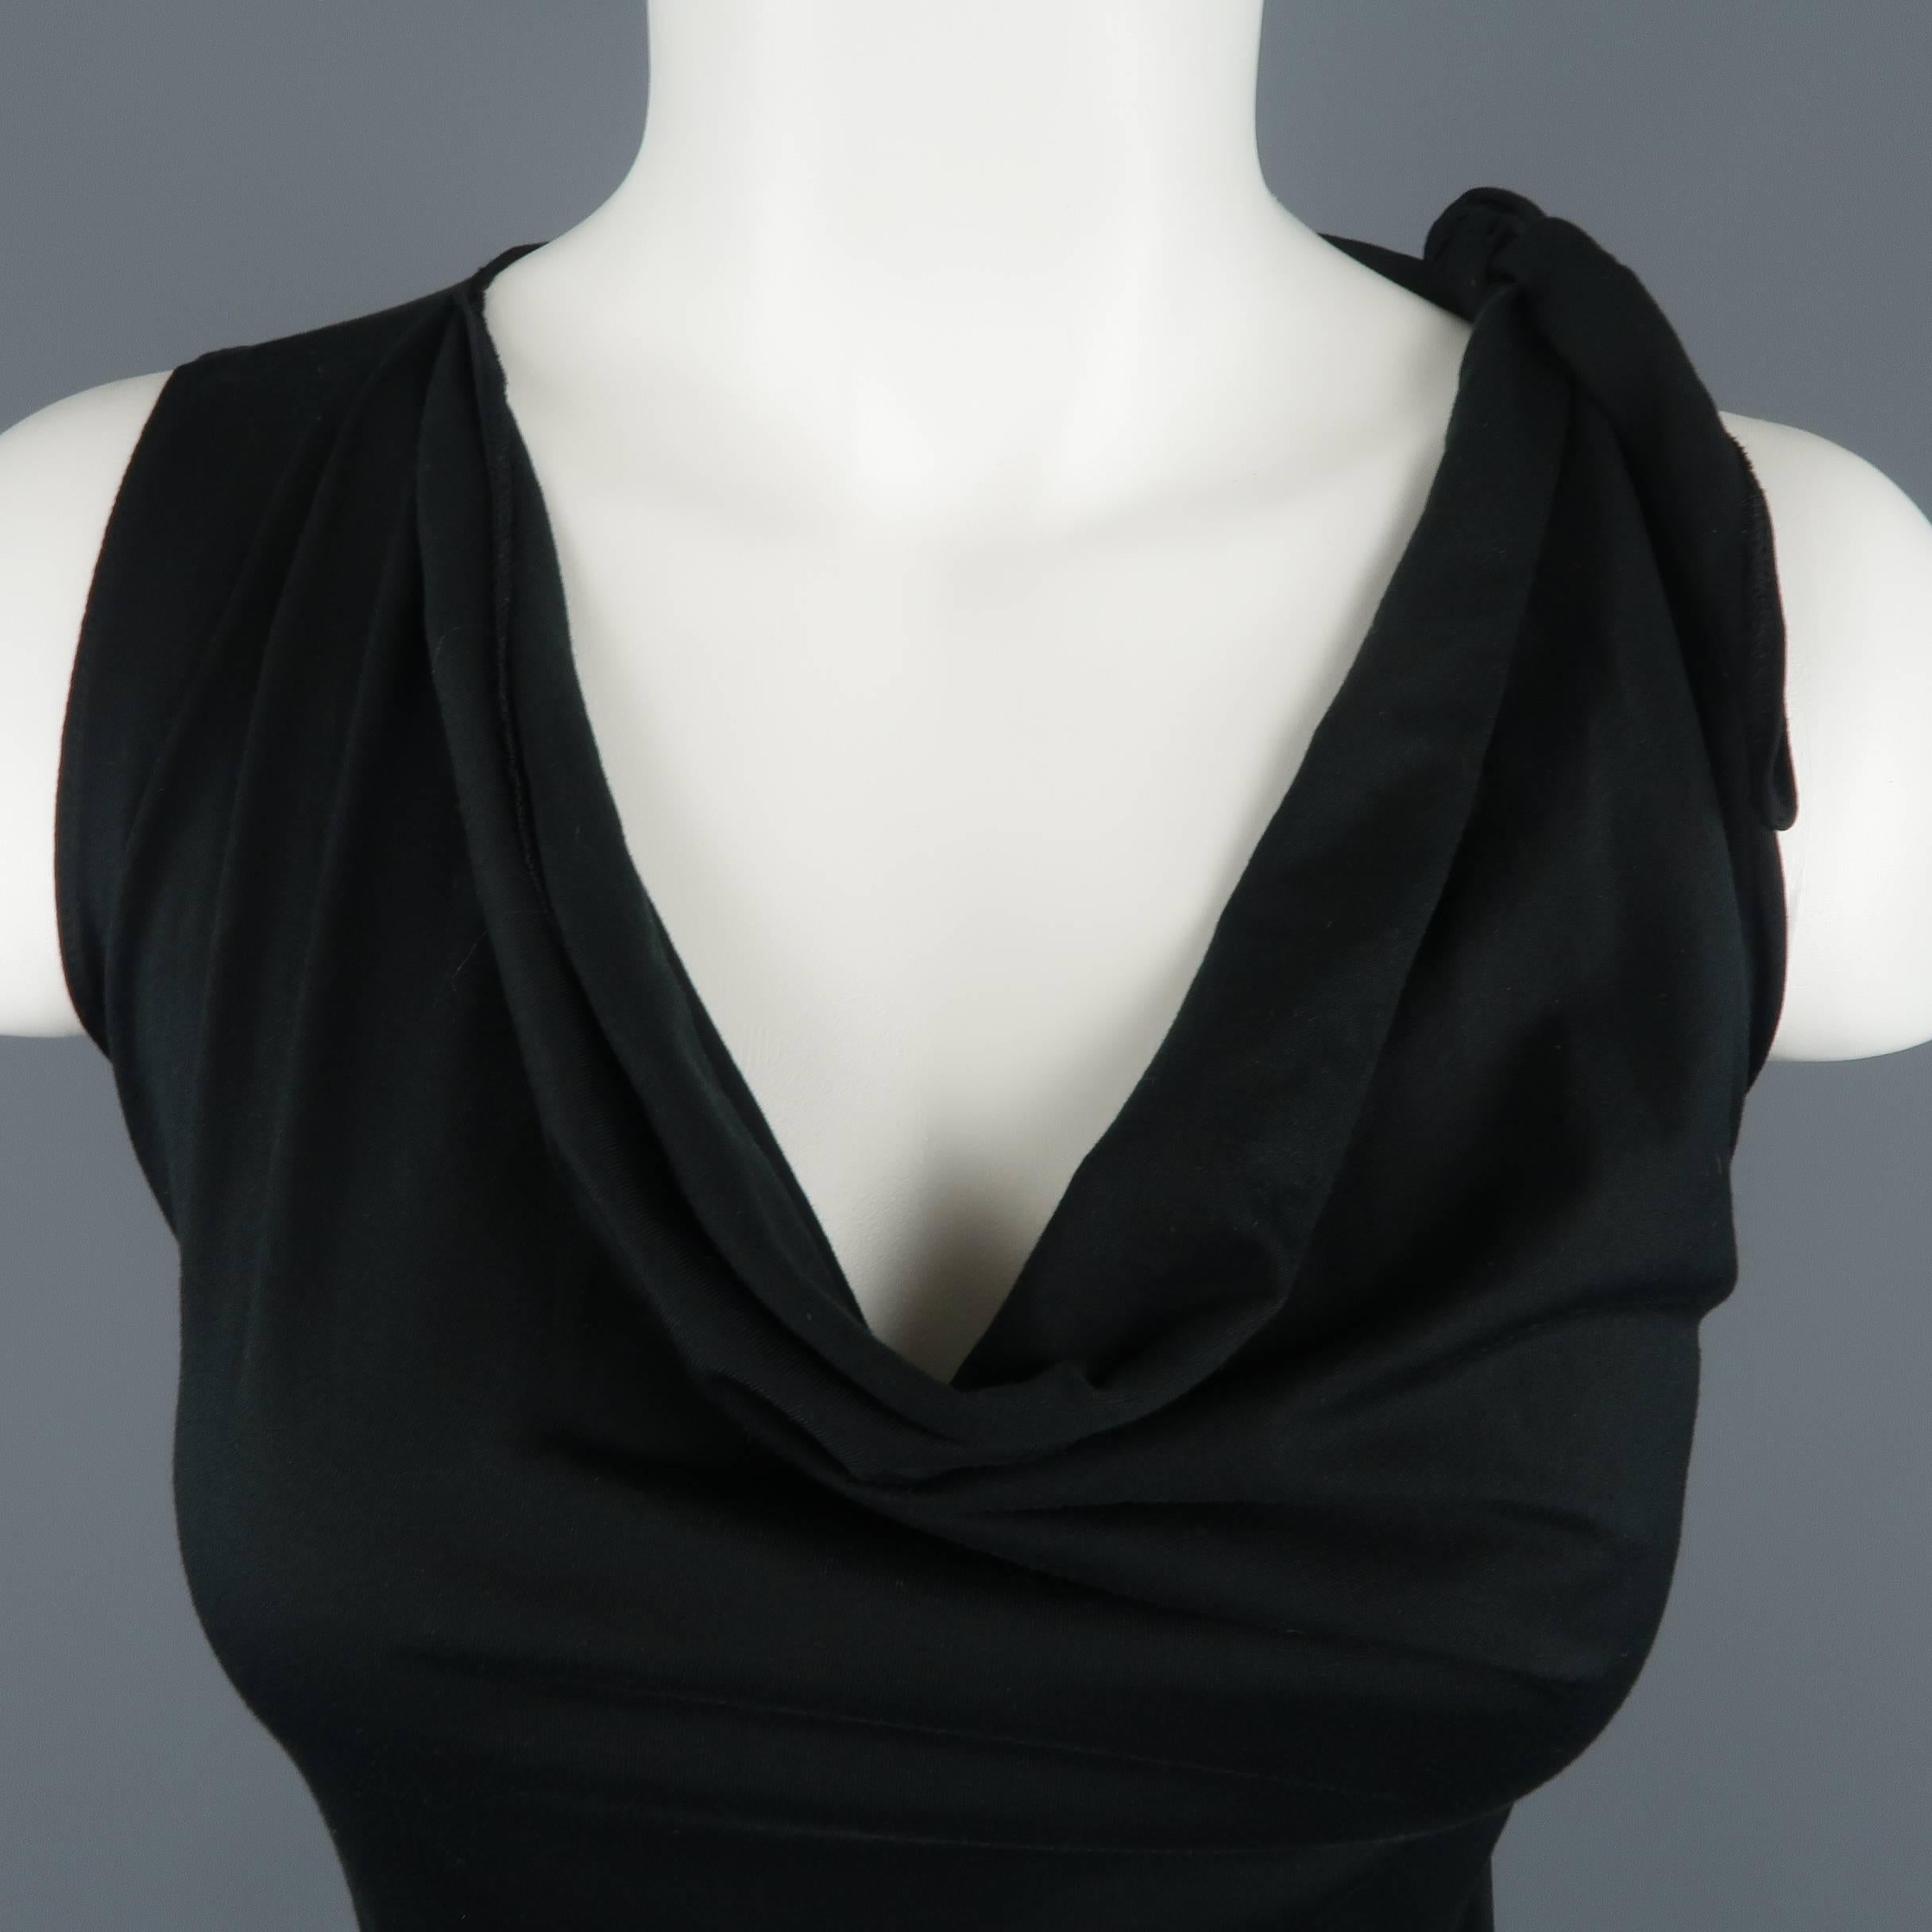 YVES SAINT LAURENT by TOM FORD top comes in black cotton jersey with a tied shoulder and draped scoop neck. Made in Italy.
 
Excellent Pre-Owned Condition.
Marked: L
 
Measurements:
 
Bust: 40 in.
Length: 23 in.
